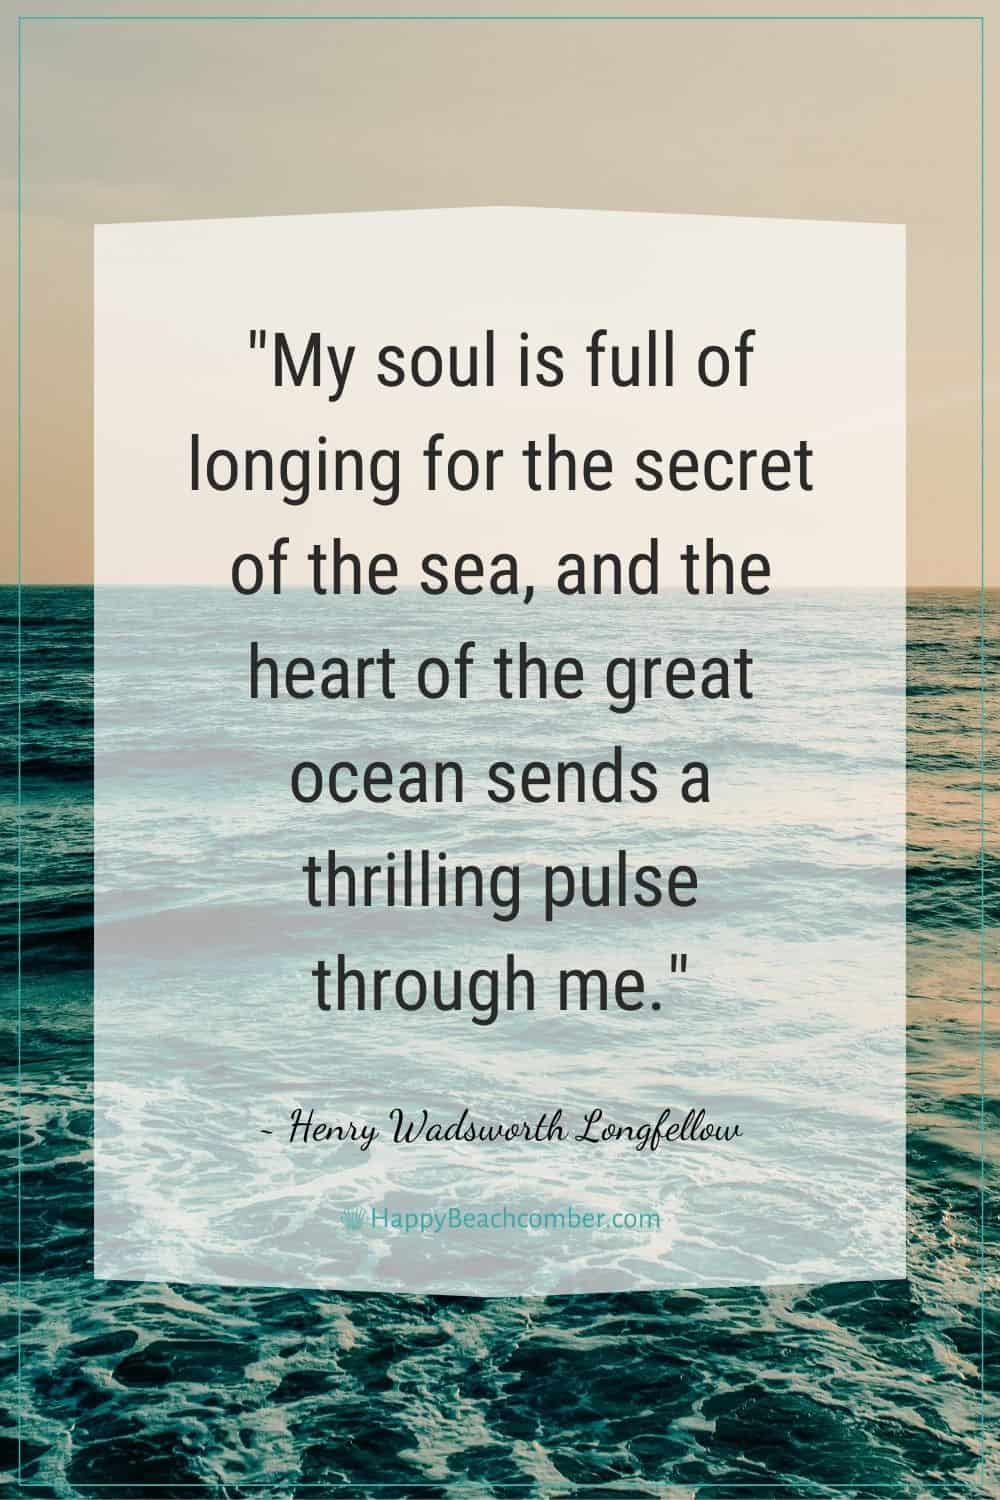 Quotes about the beach - Henry Wadsworth Longfellow